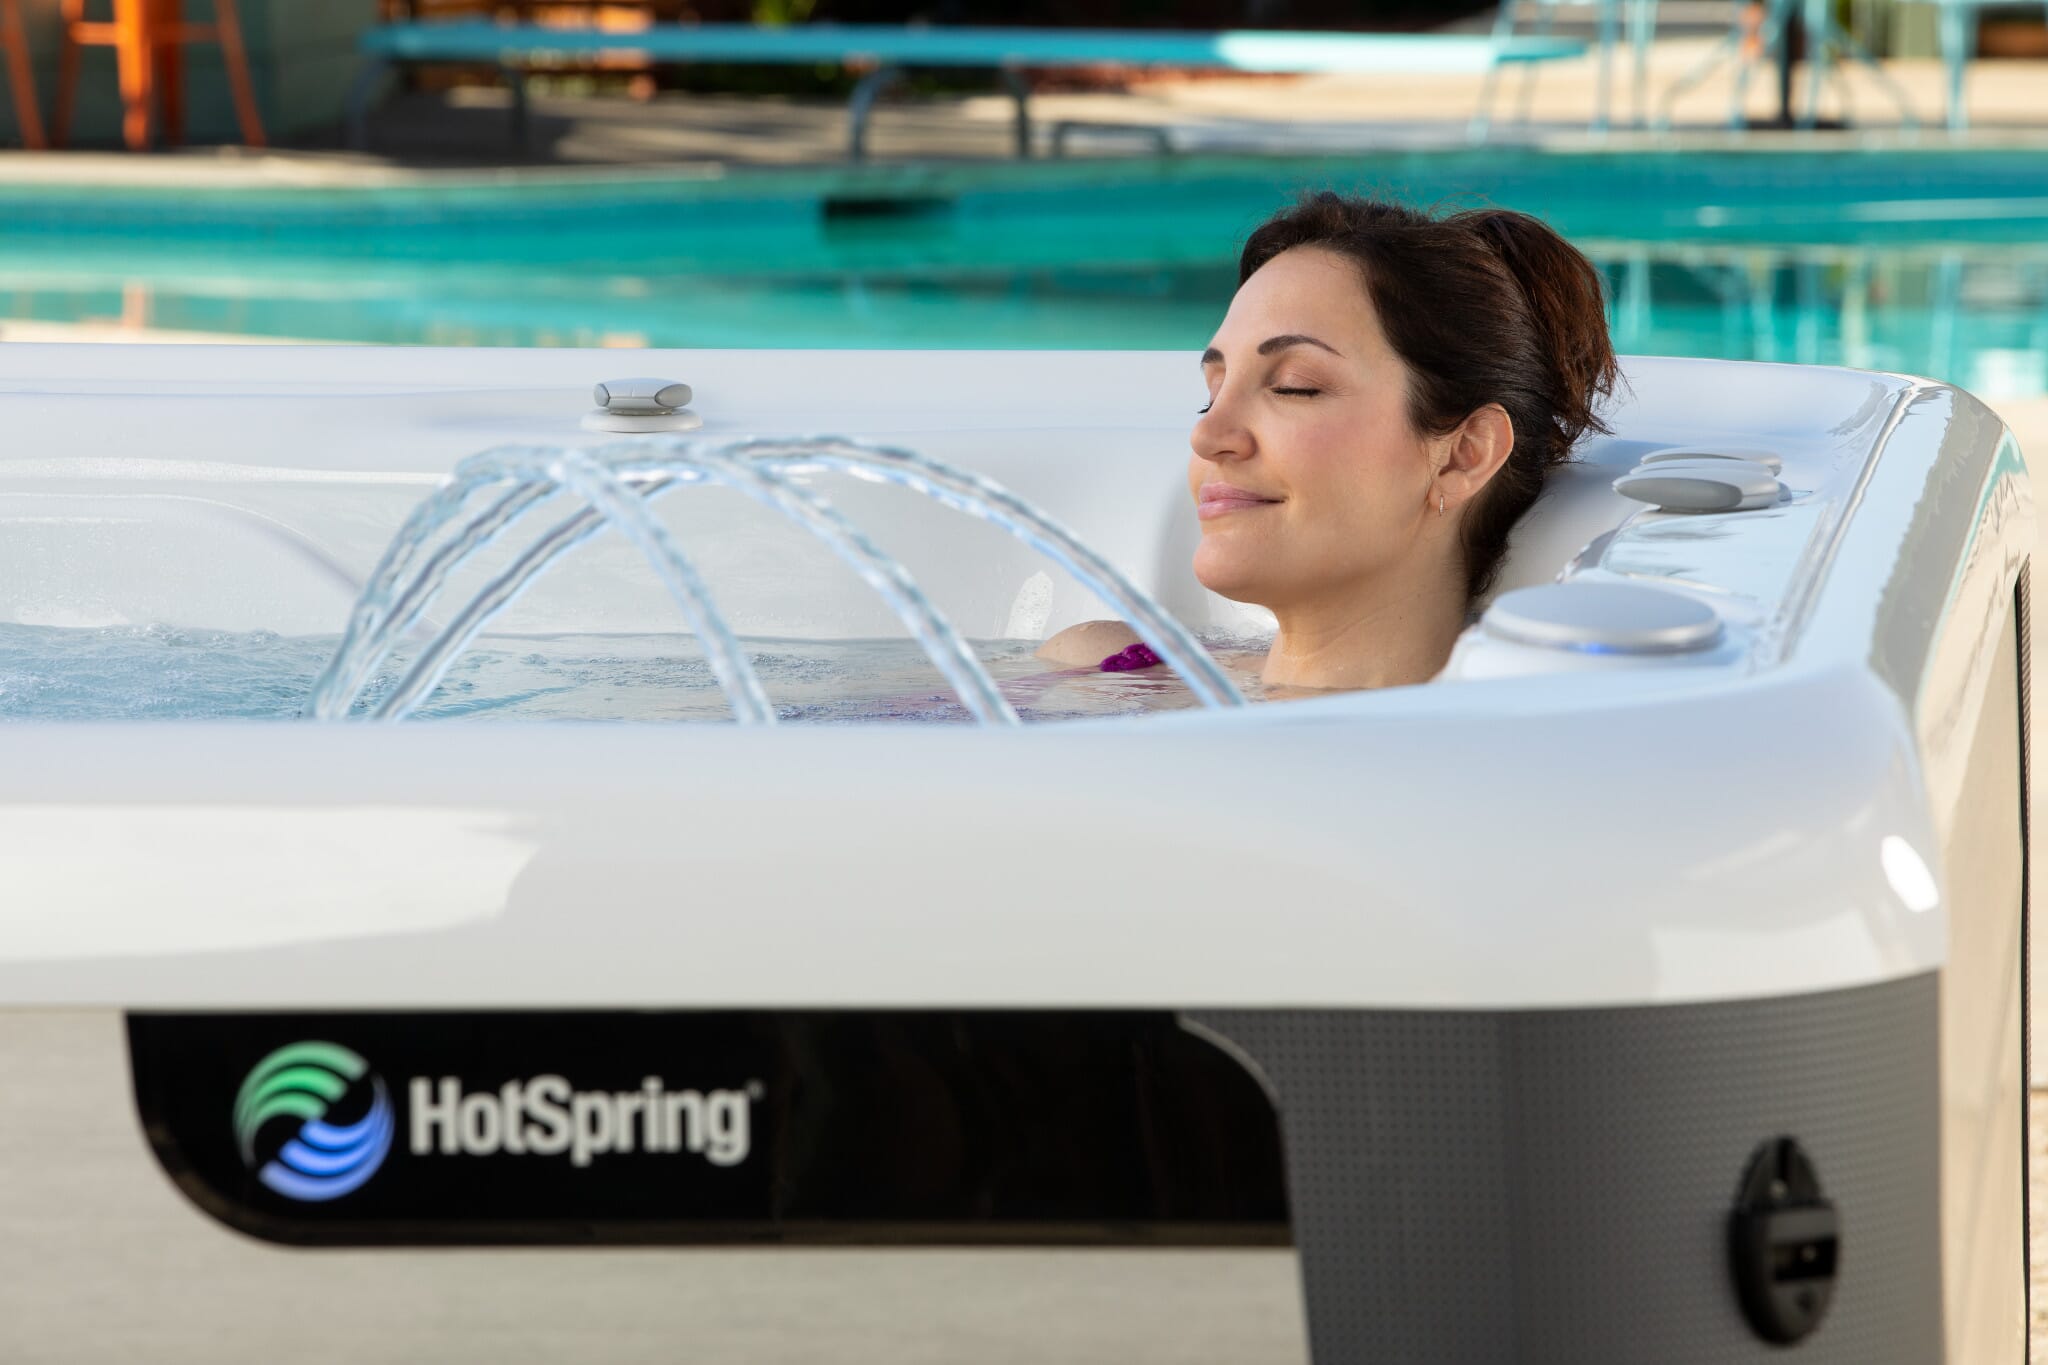 What Are the Best Accessories for my Outdoor Hot Tub? - Hot Spring Spas